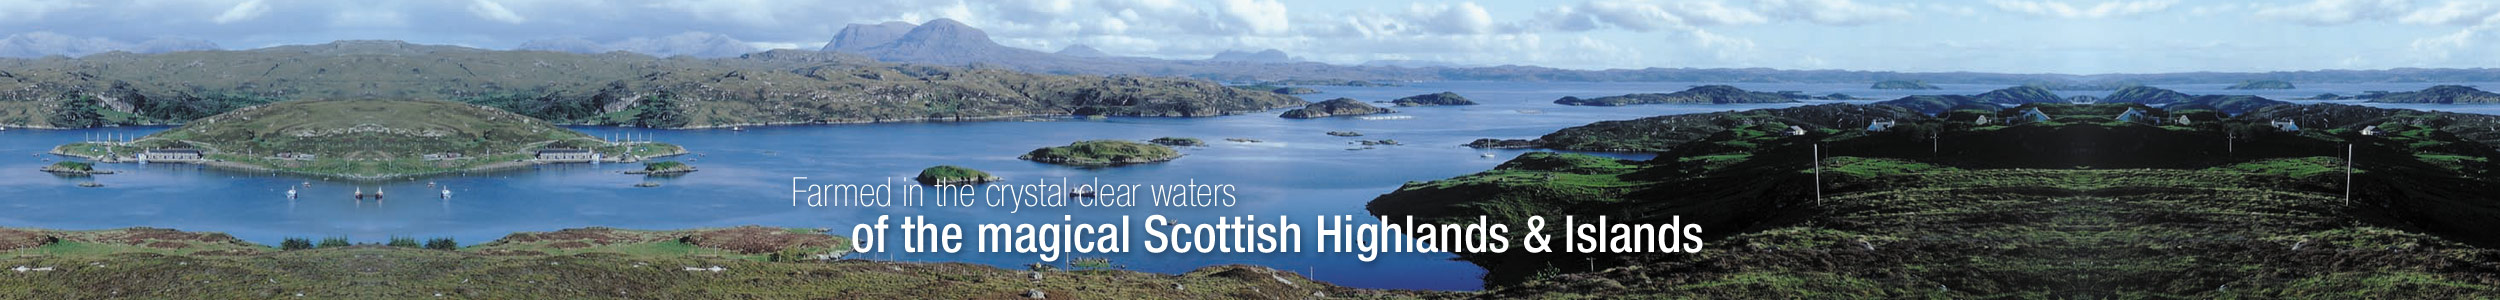 Farmed in the crystal clear waters of the magical Scottish Highlands & islands